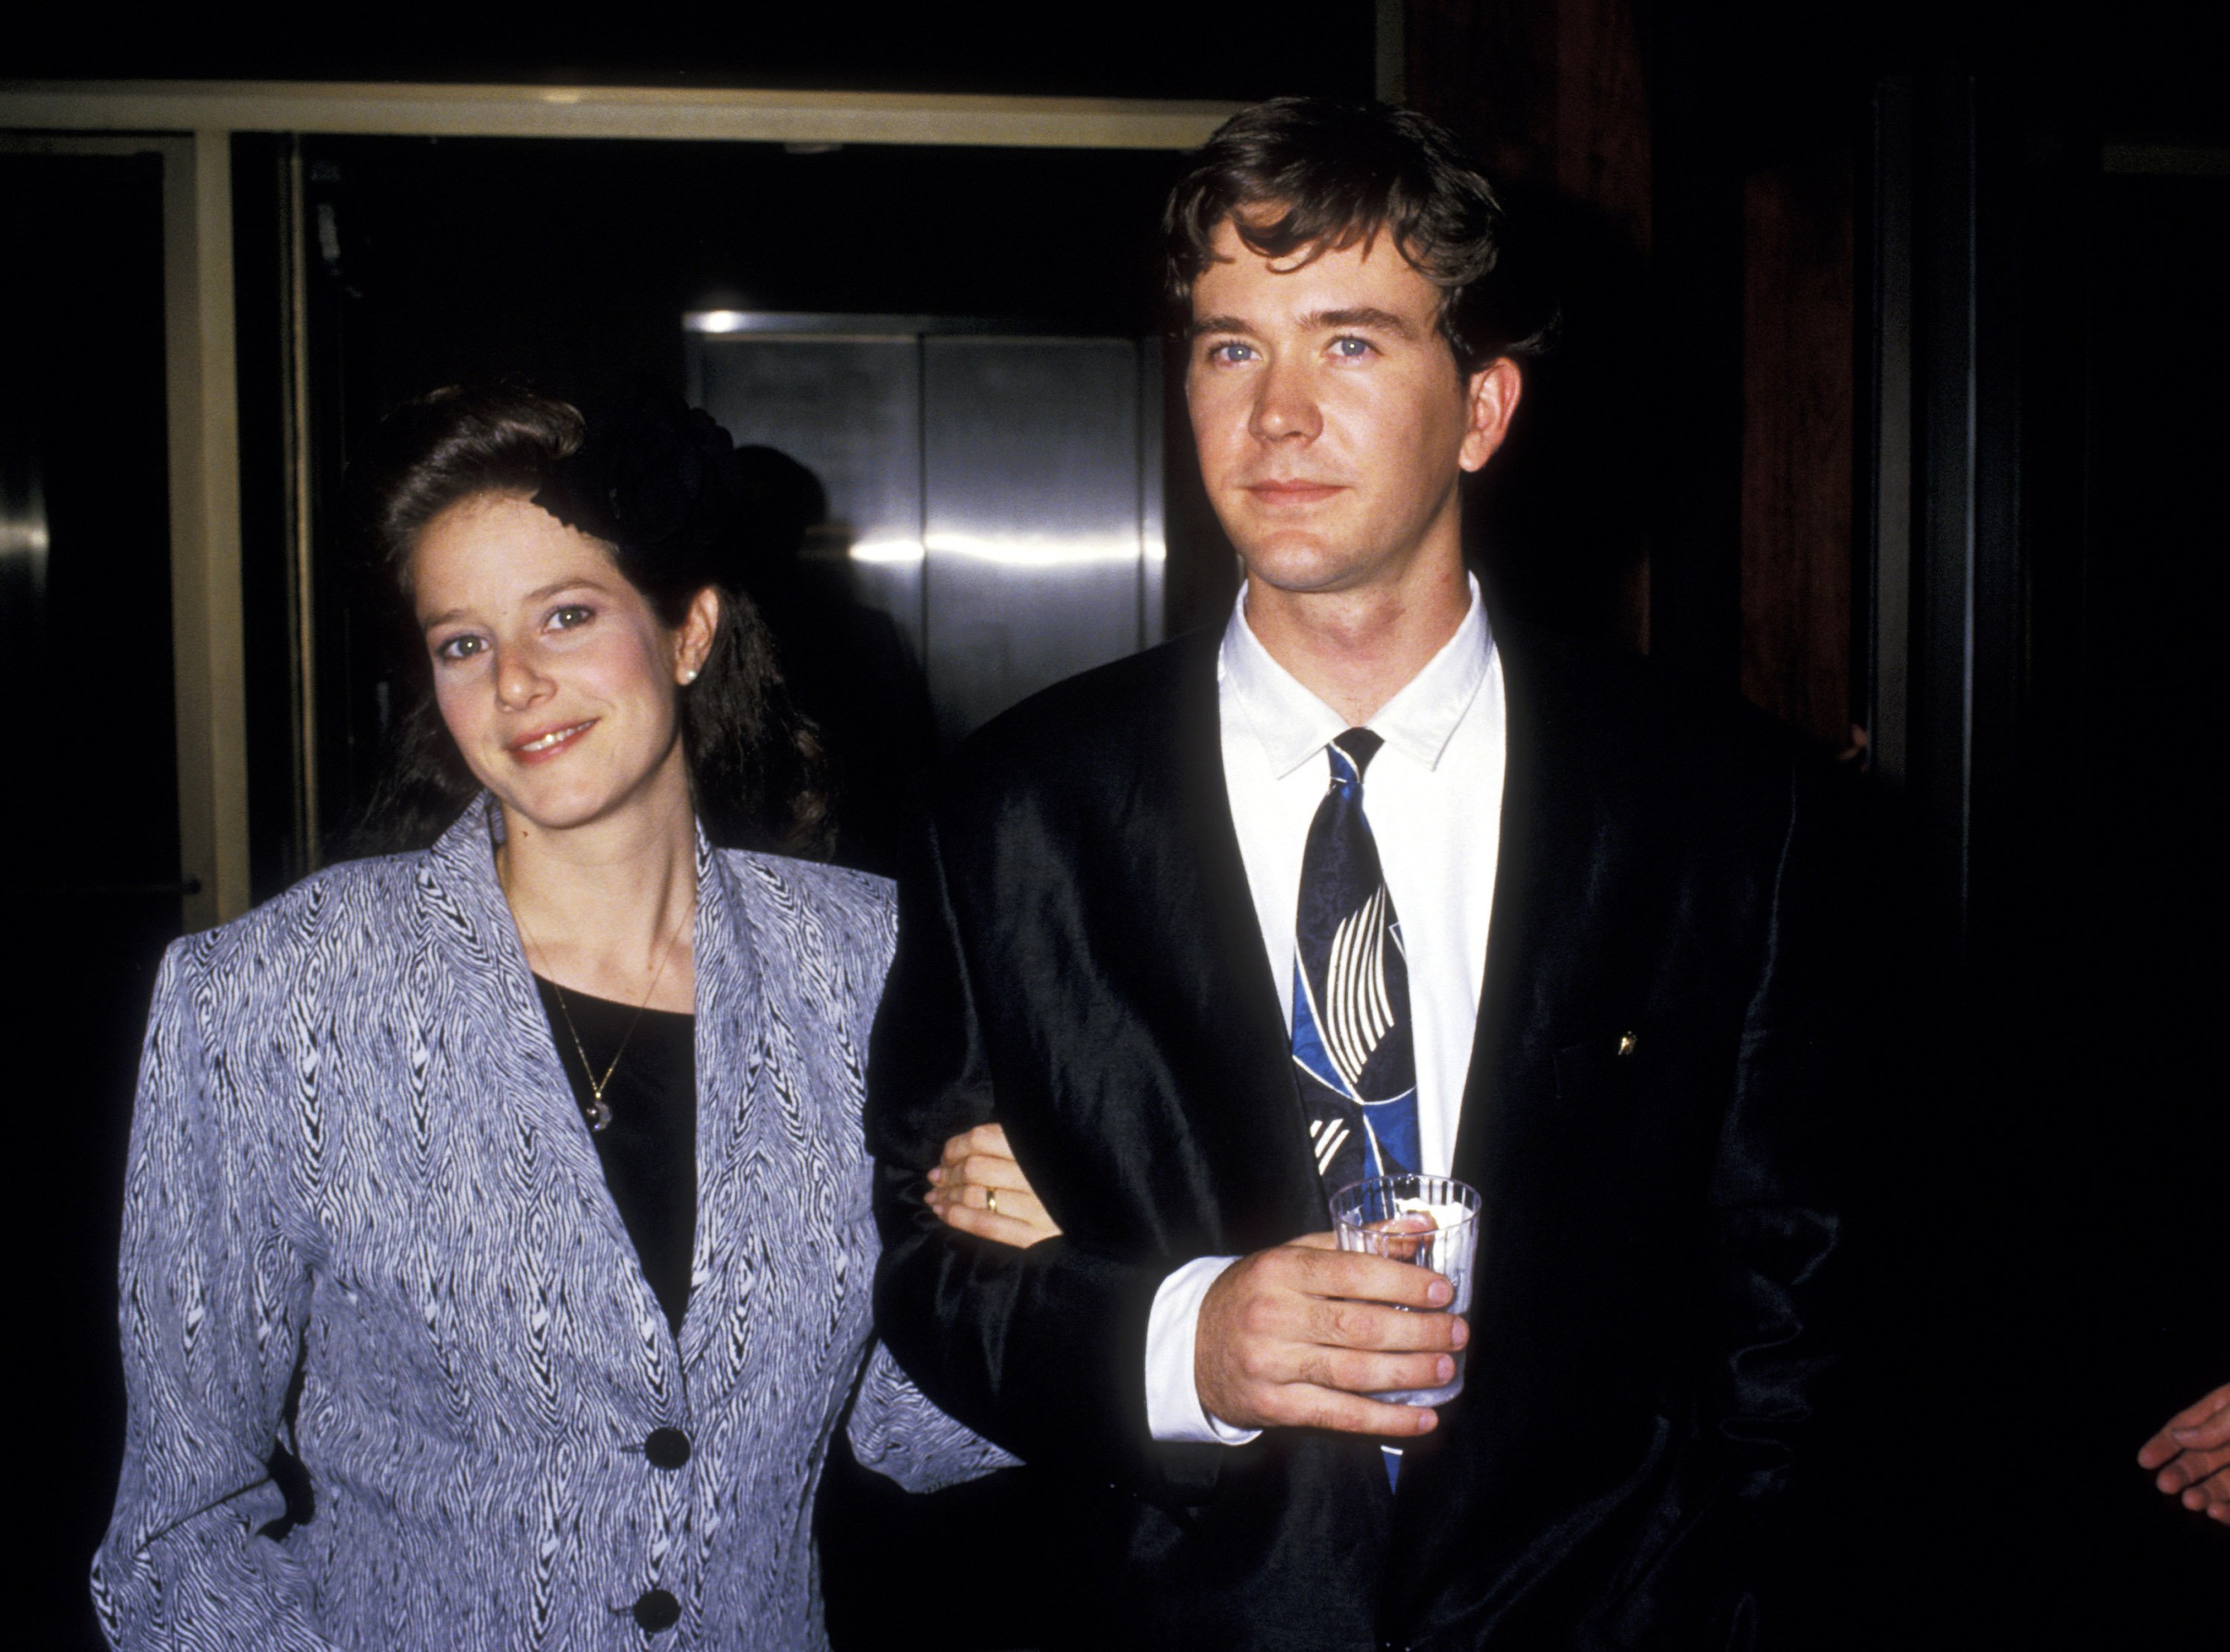 Debra Winger and Timothy Hutton at the 1987 Student Film Awards | Source: Getty Images